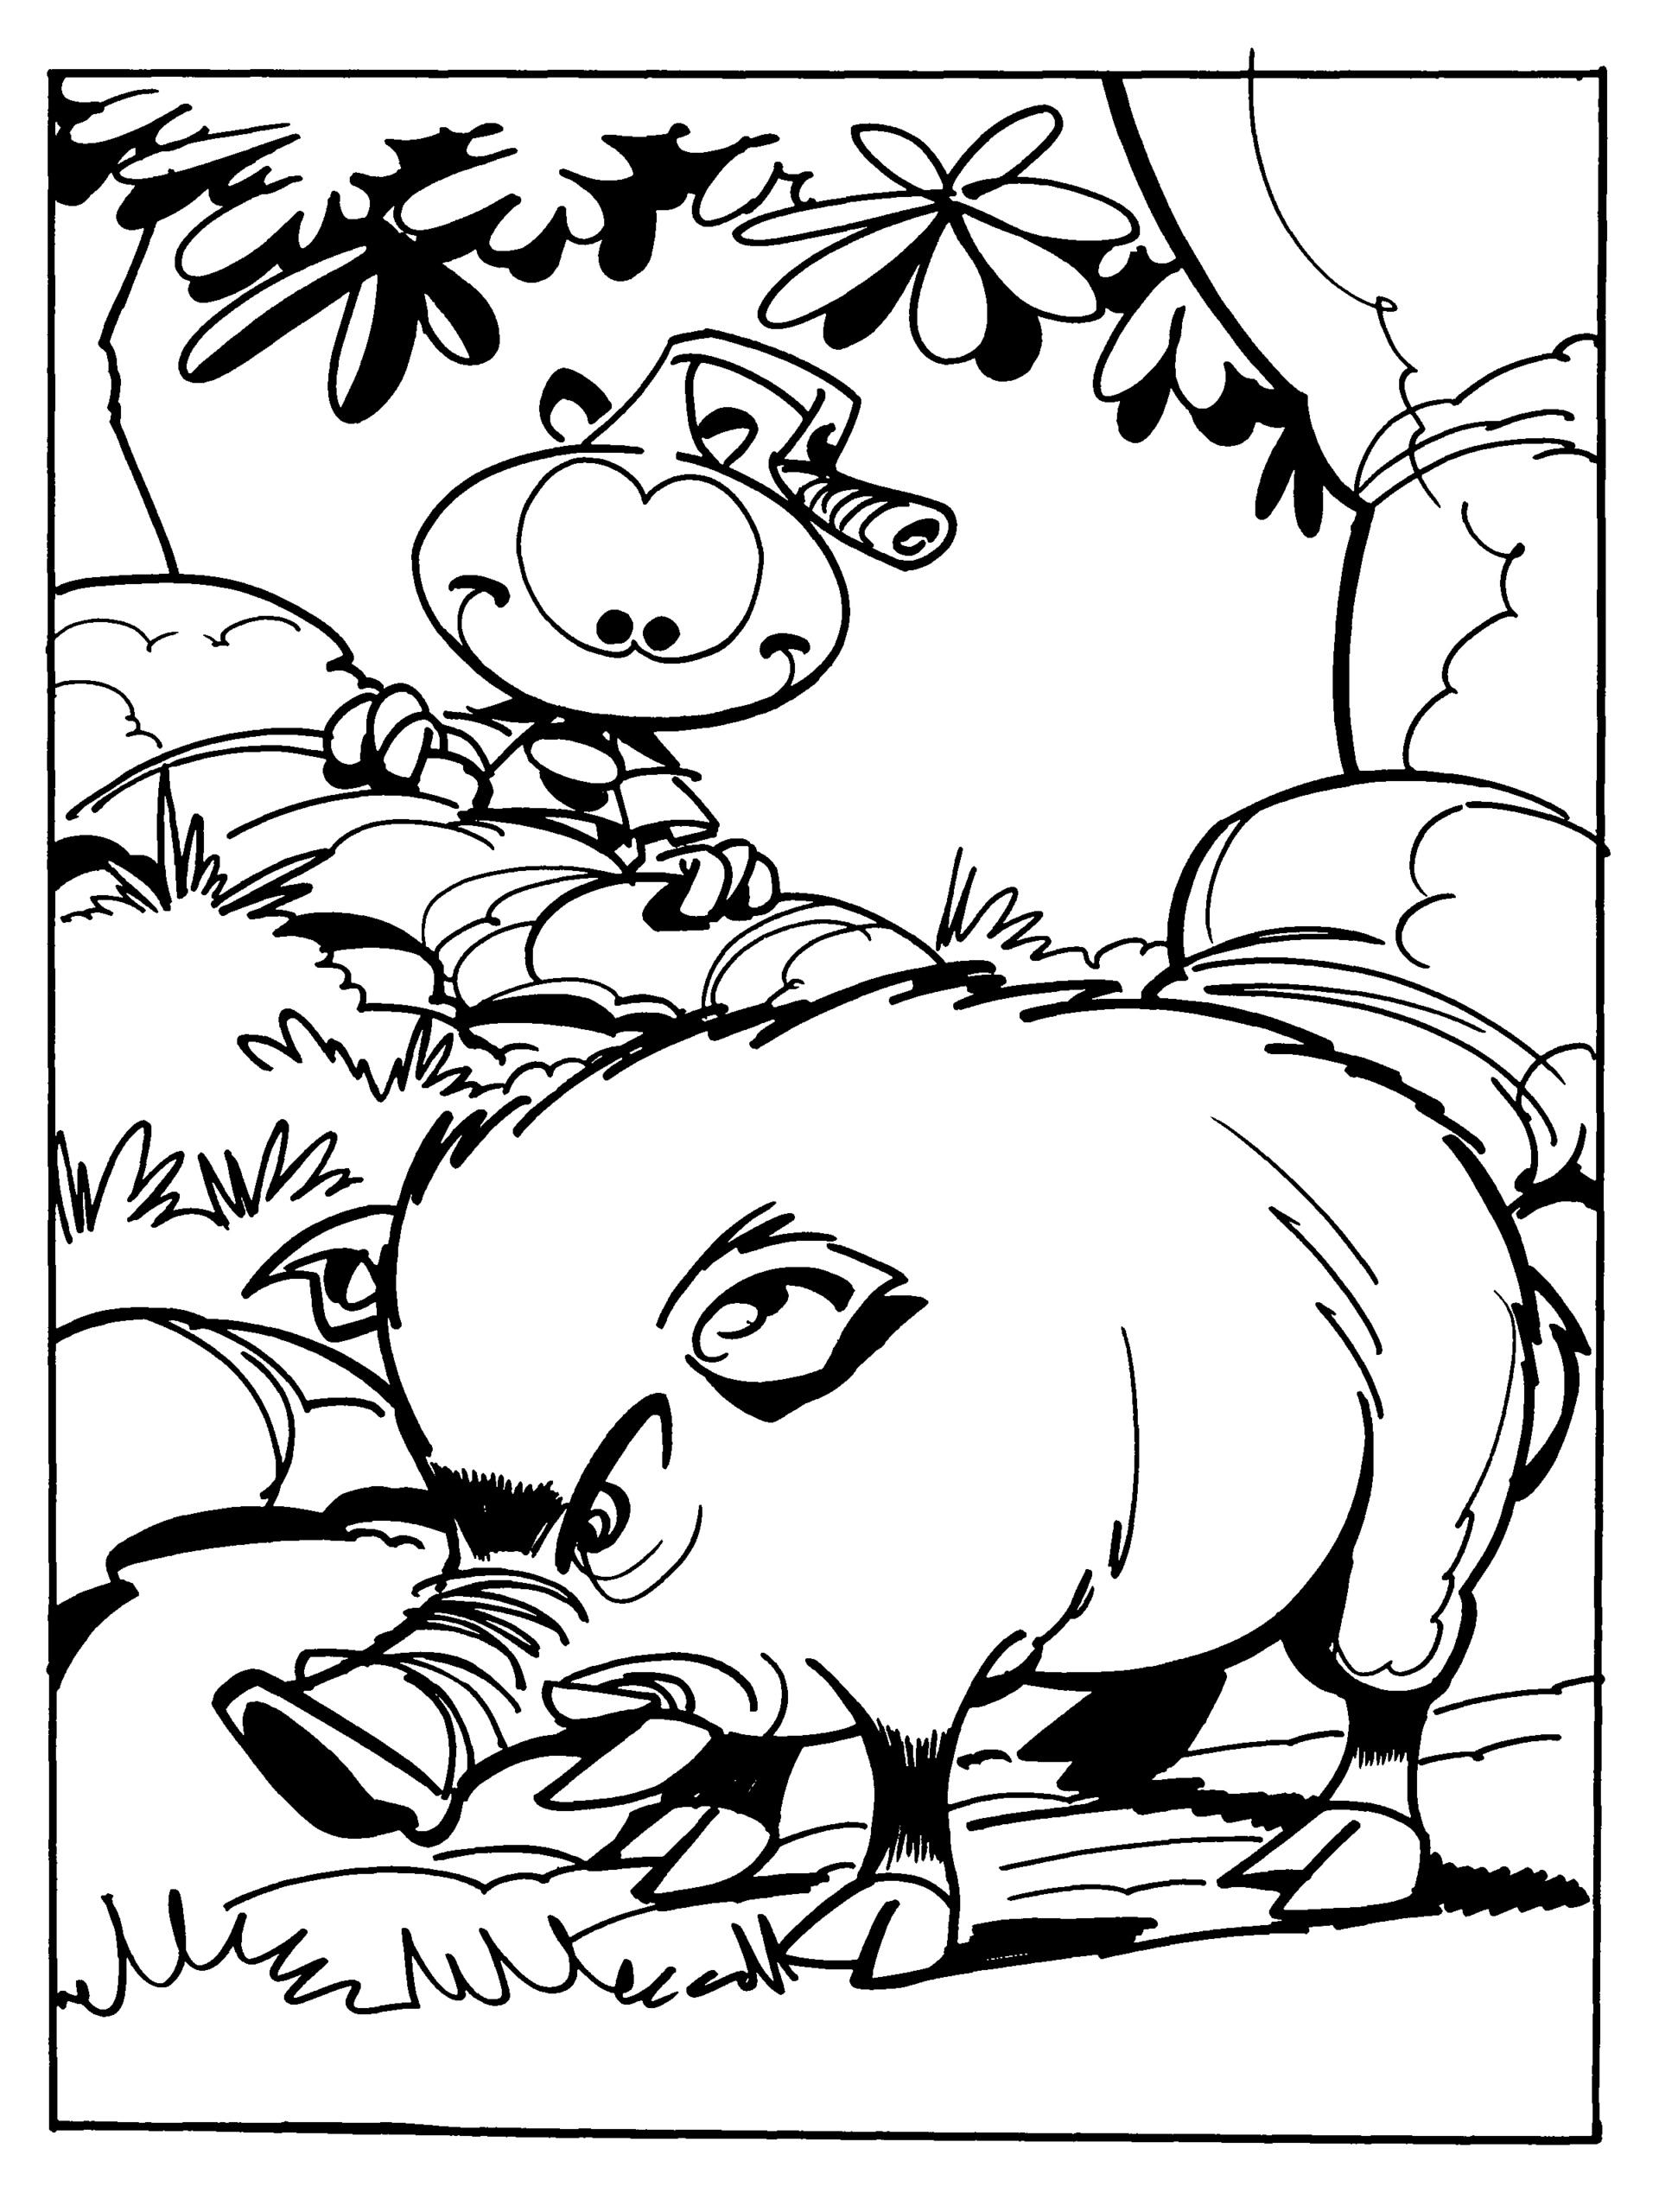 Snorks Coloring Pages TV Film snorks 10 Printable 2020 07642 Coloring4free